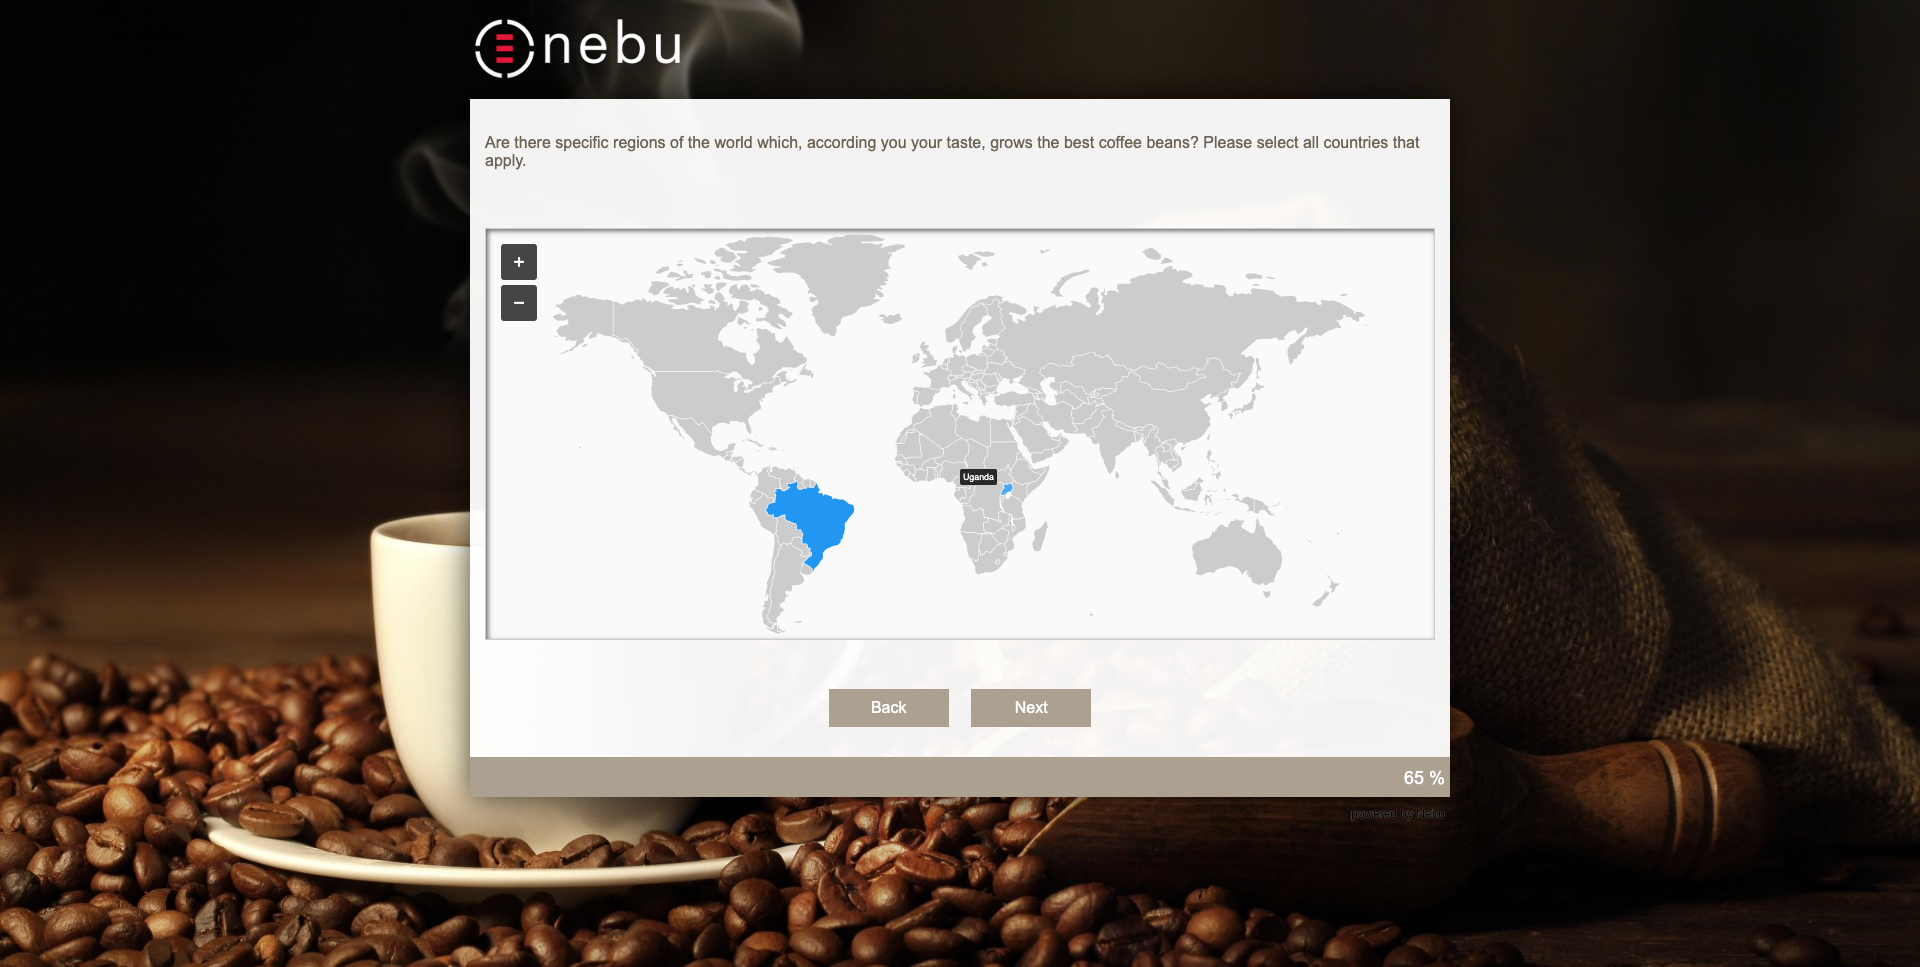 A Map Picker plugin implemented in one of Nebu's questionnaires